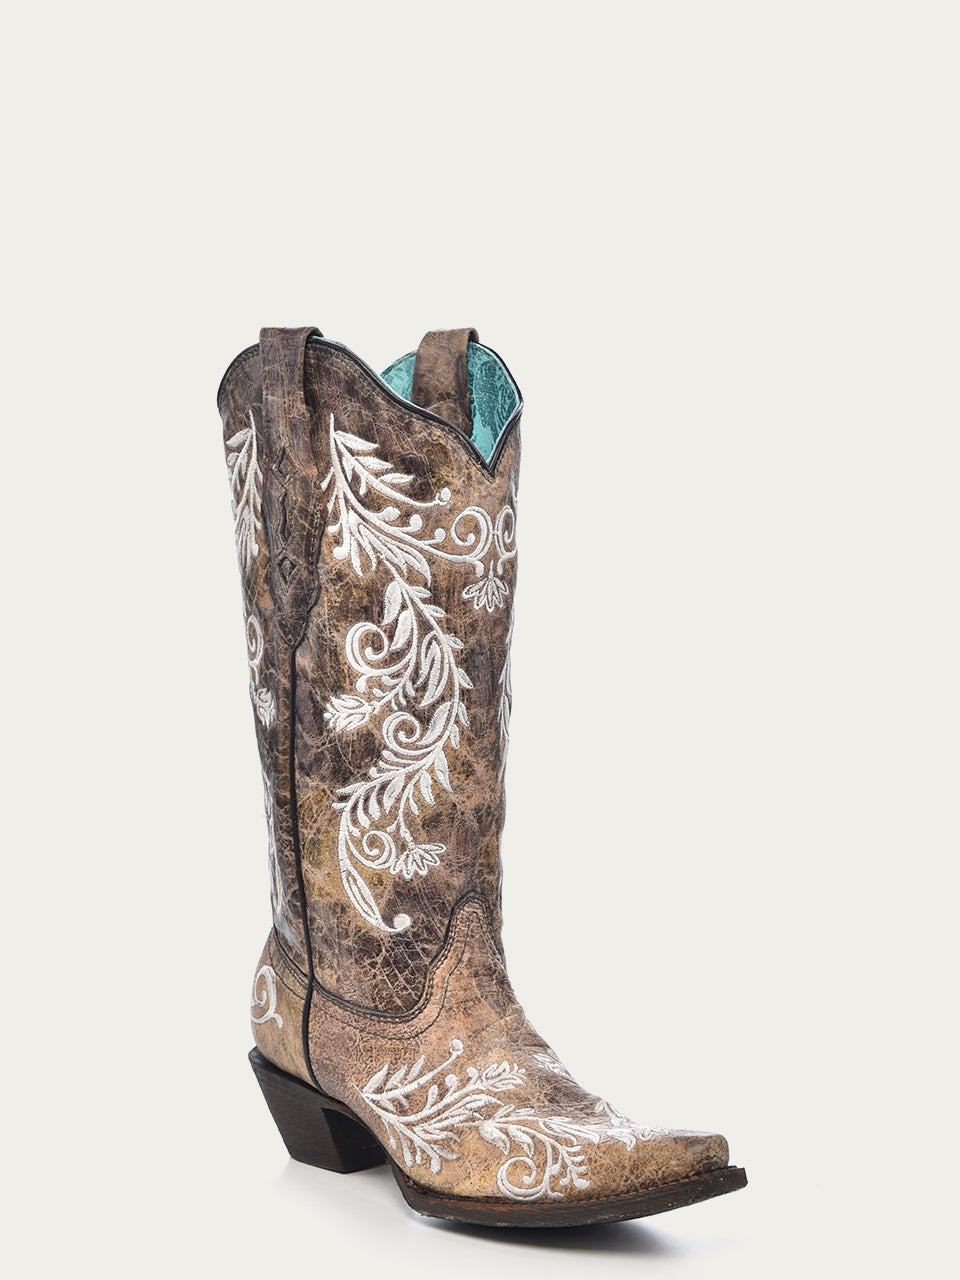 A Boot Maker's Guide To The Perfect Cowboy Boot Fit